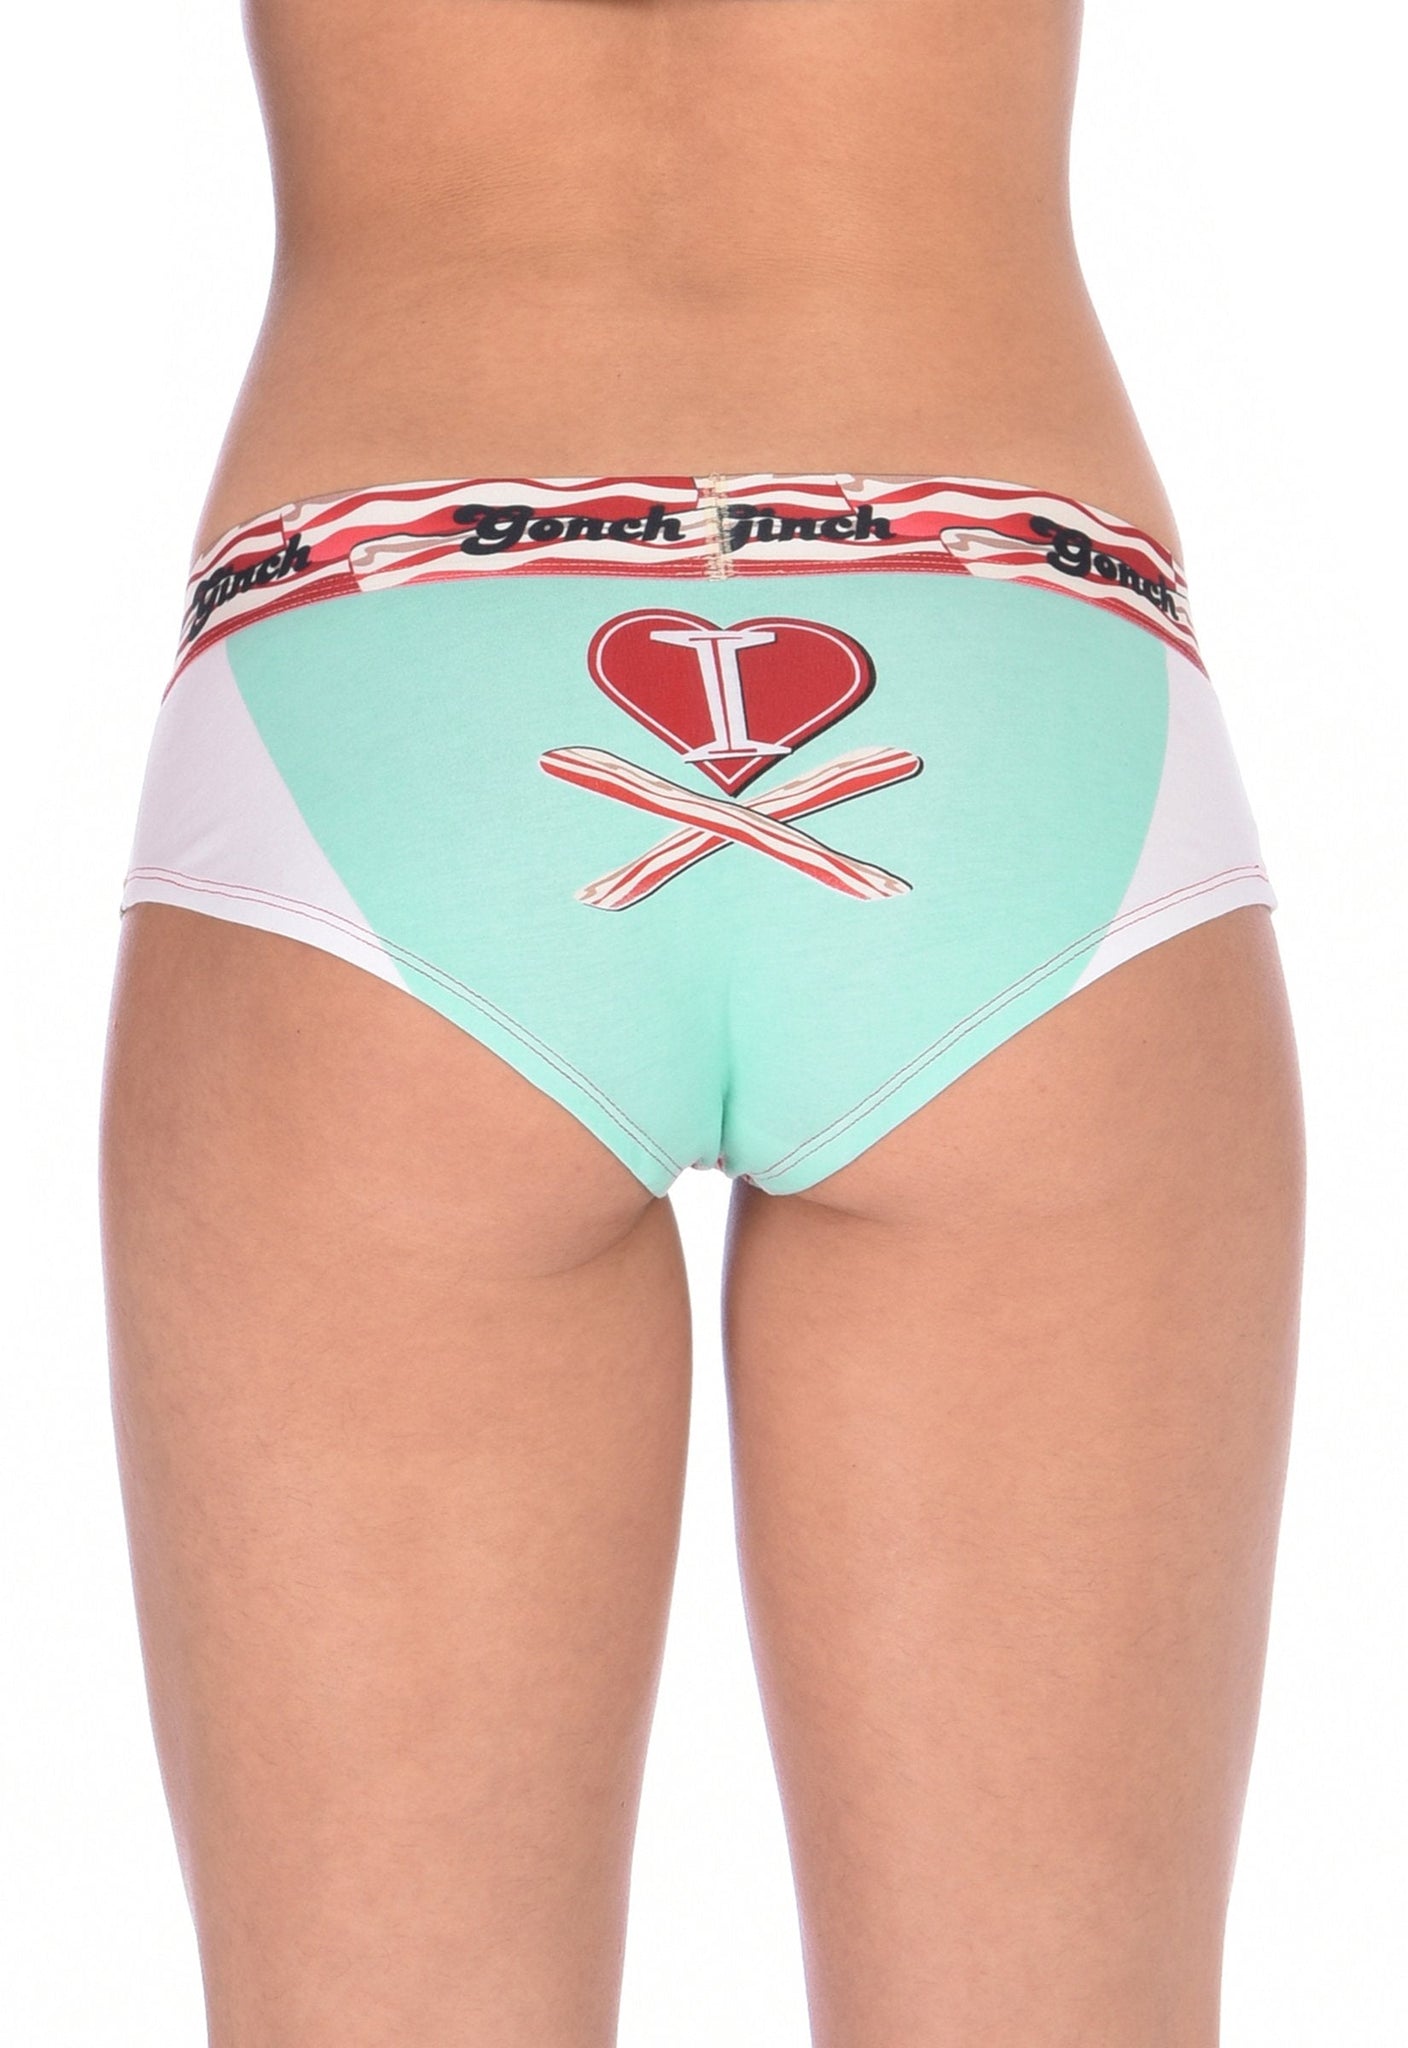 I Love Bacon Brief Ginch Gonch Women's underwear boy cut gogo with white teal and red, and bacon detail and waistband back